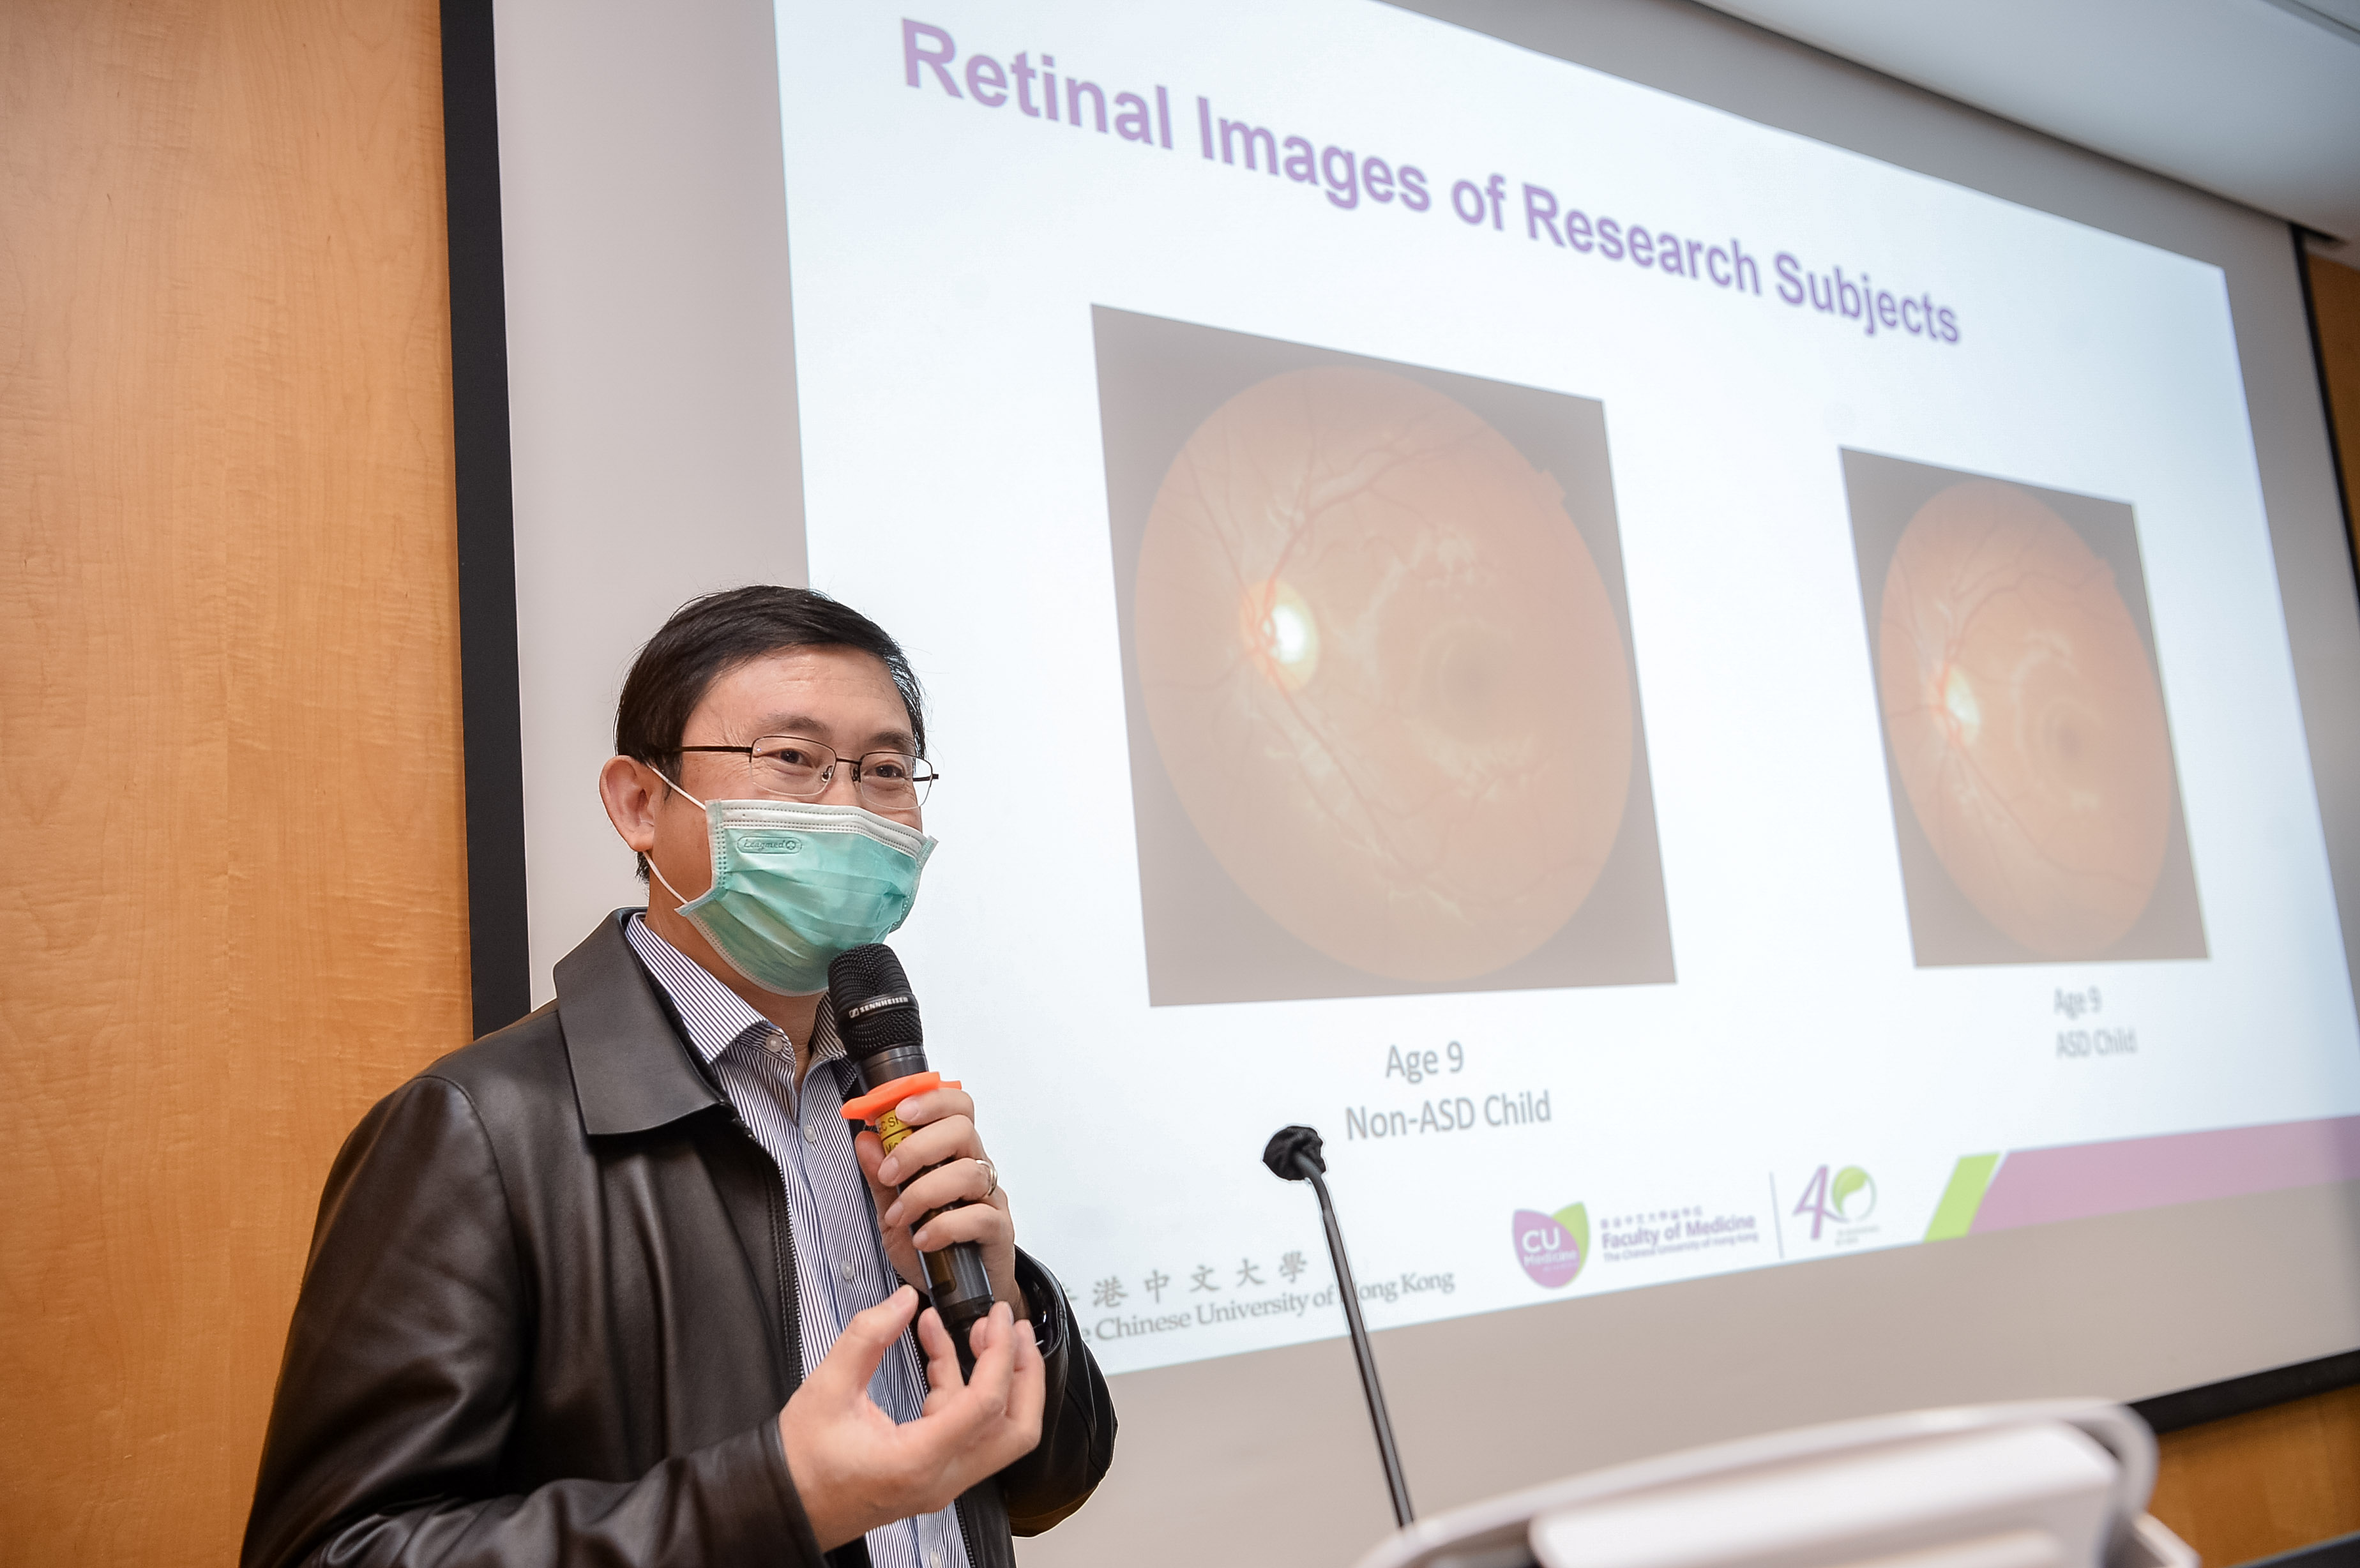 Prof. Benny Zee hopes that the retinal image analysis technology can be used as an objective screening method in a community setting and provide an efficient tool to assess the risk of autism.